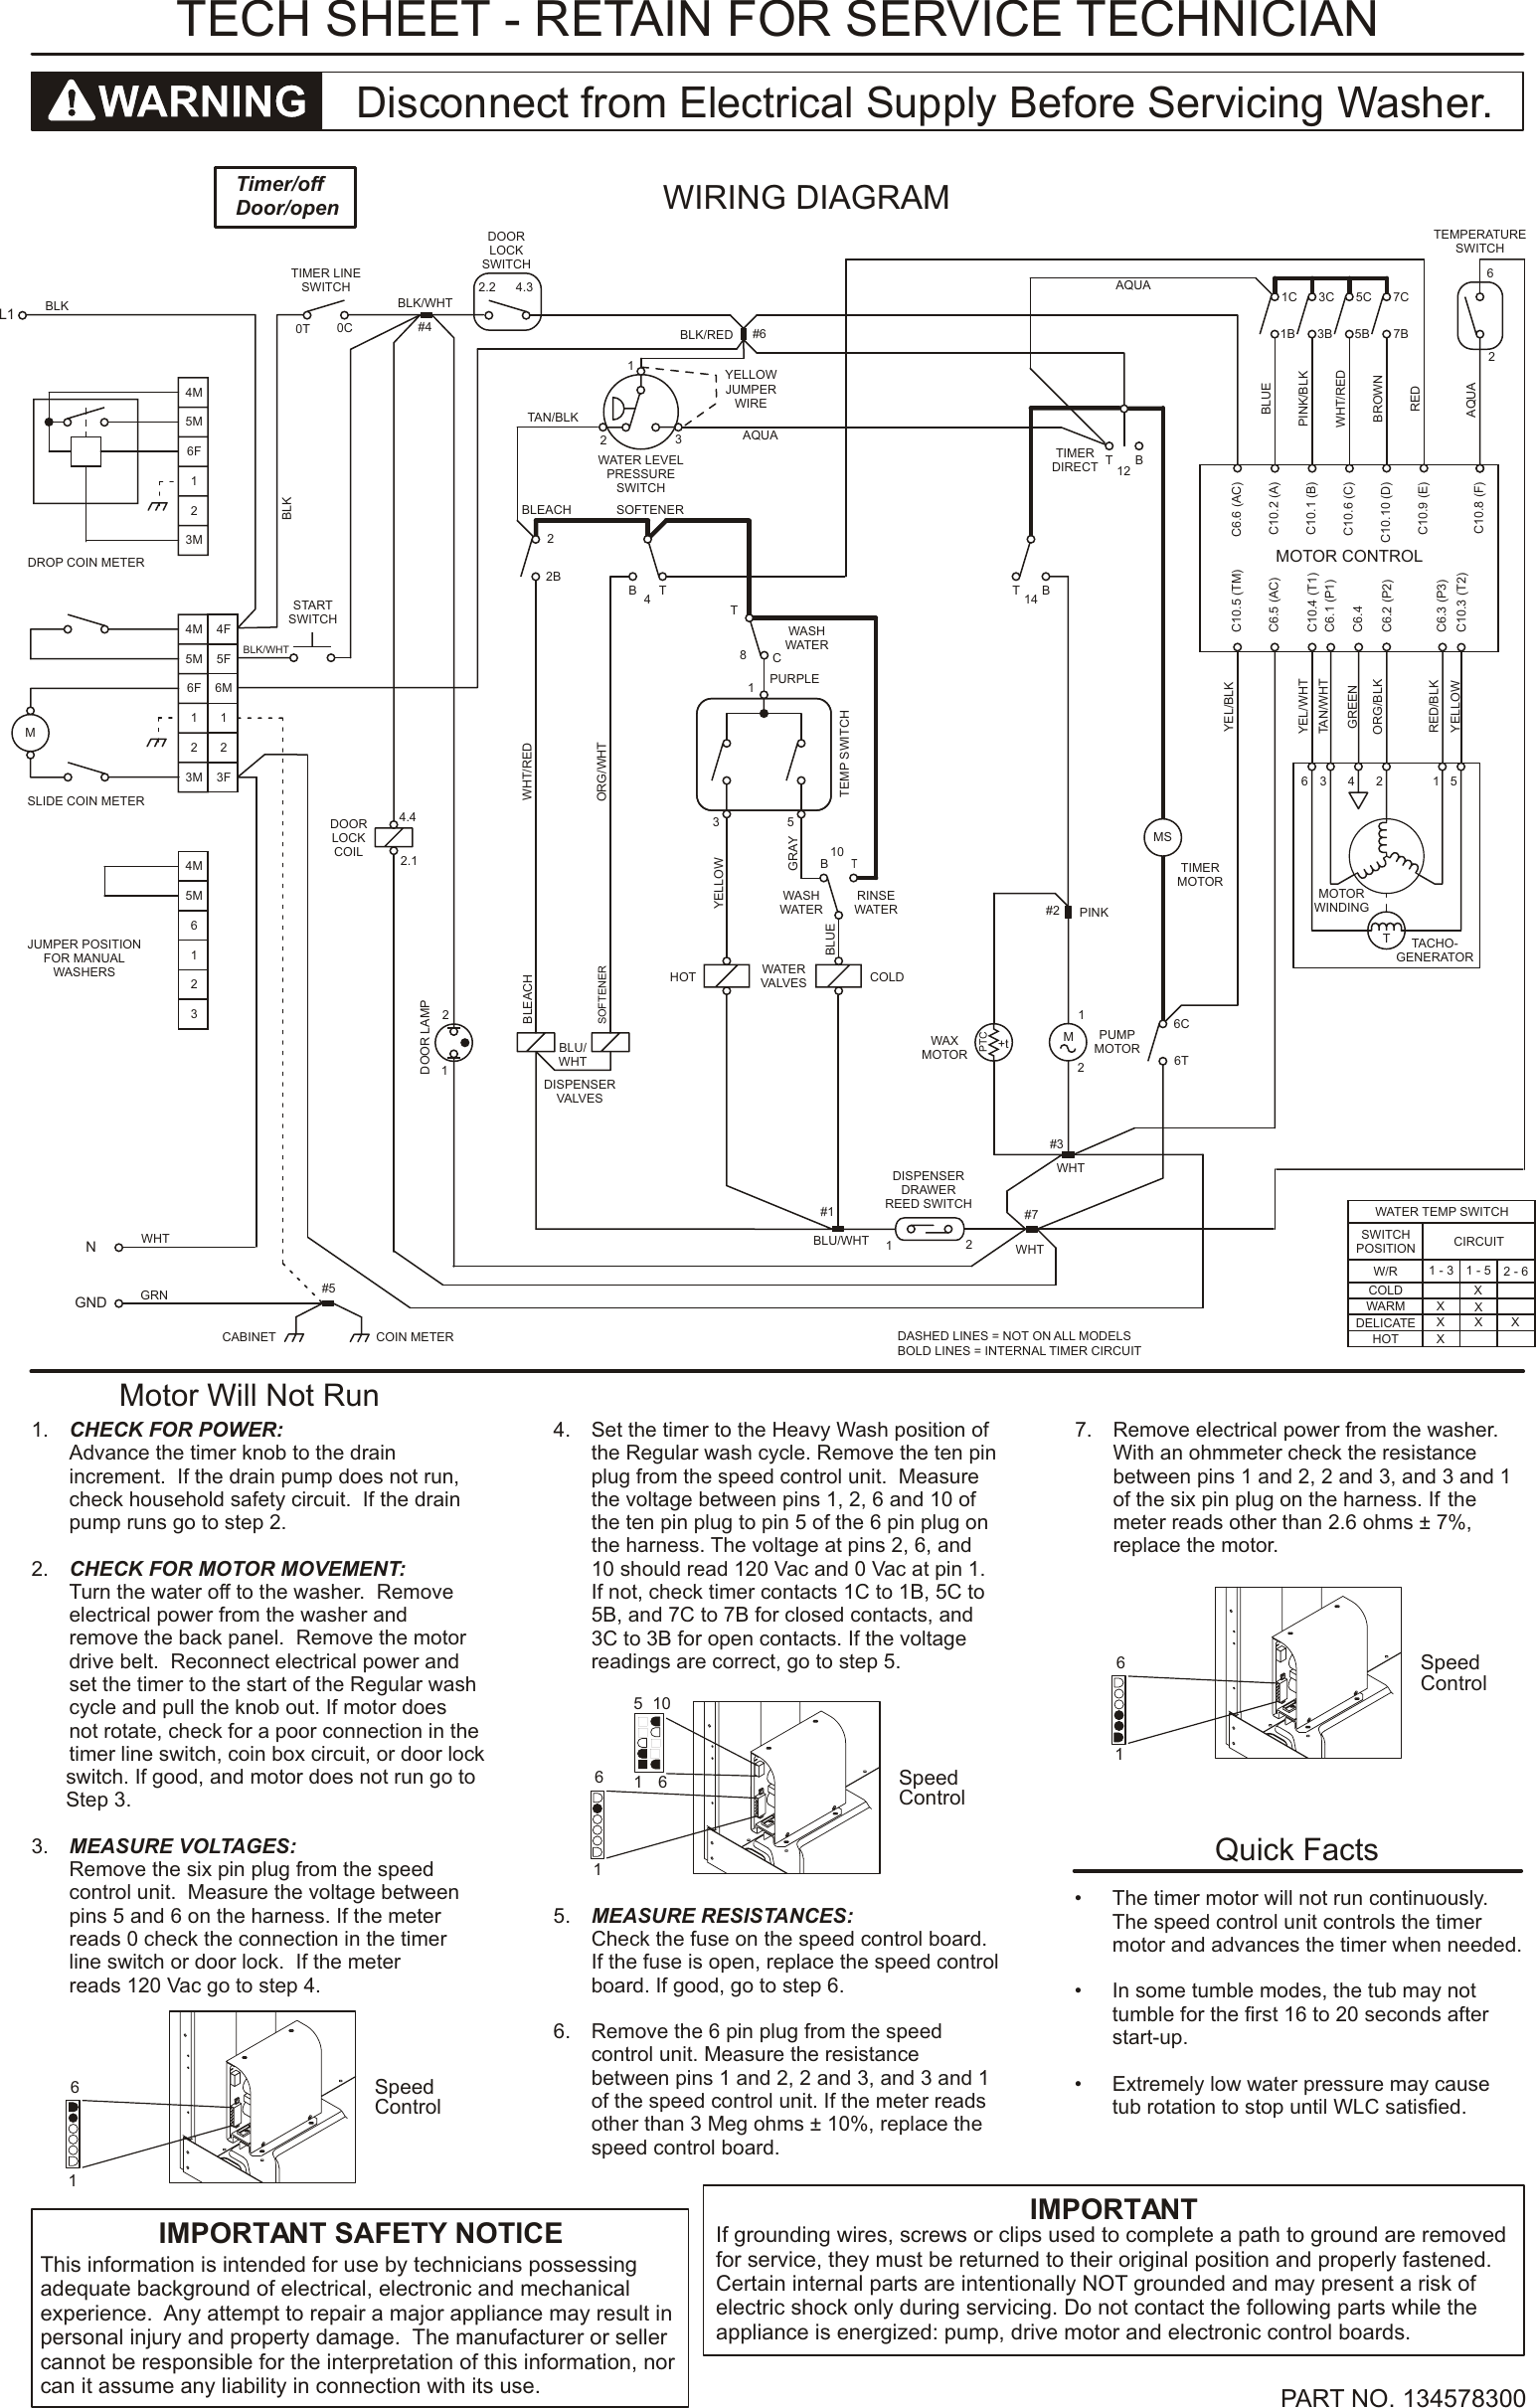 Page 3 of 4 - Kenmore Front Load Washer Wiring Sheet 417.24182301